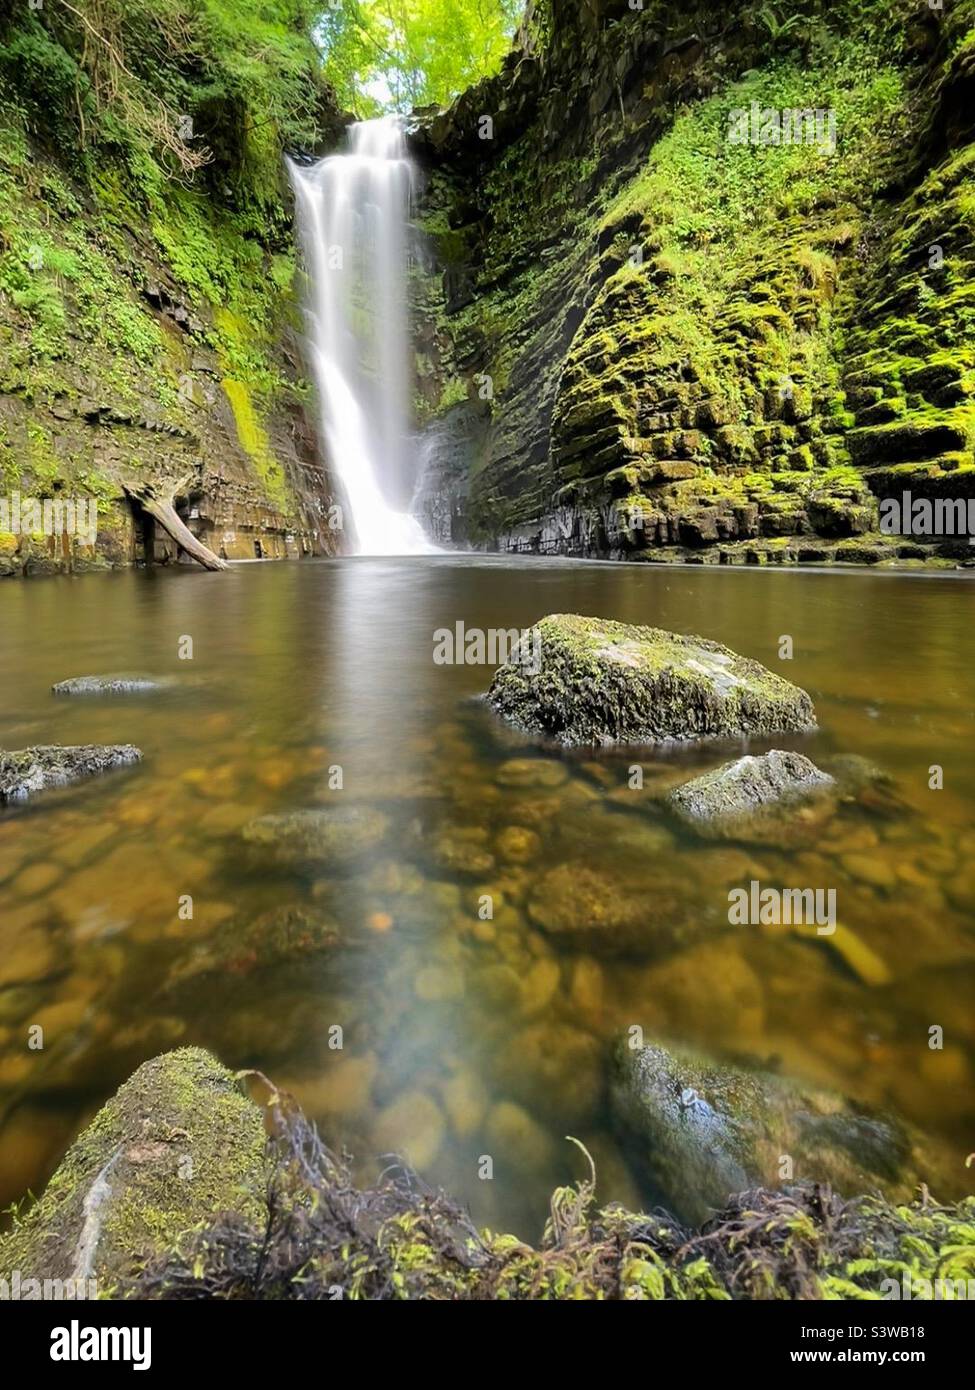 Sgwd Einion Gam (waterfall of the crooked anvil), Afon Pyrddin, Brecon Beacons, Wales. Stock Photo